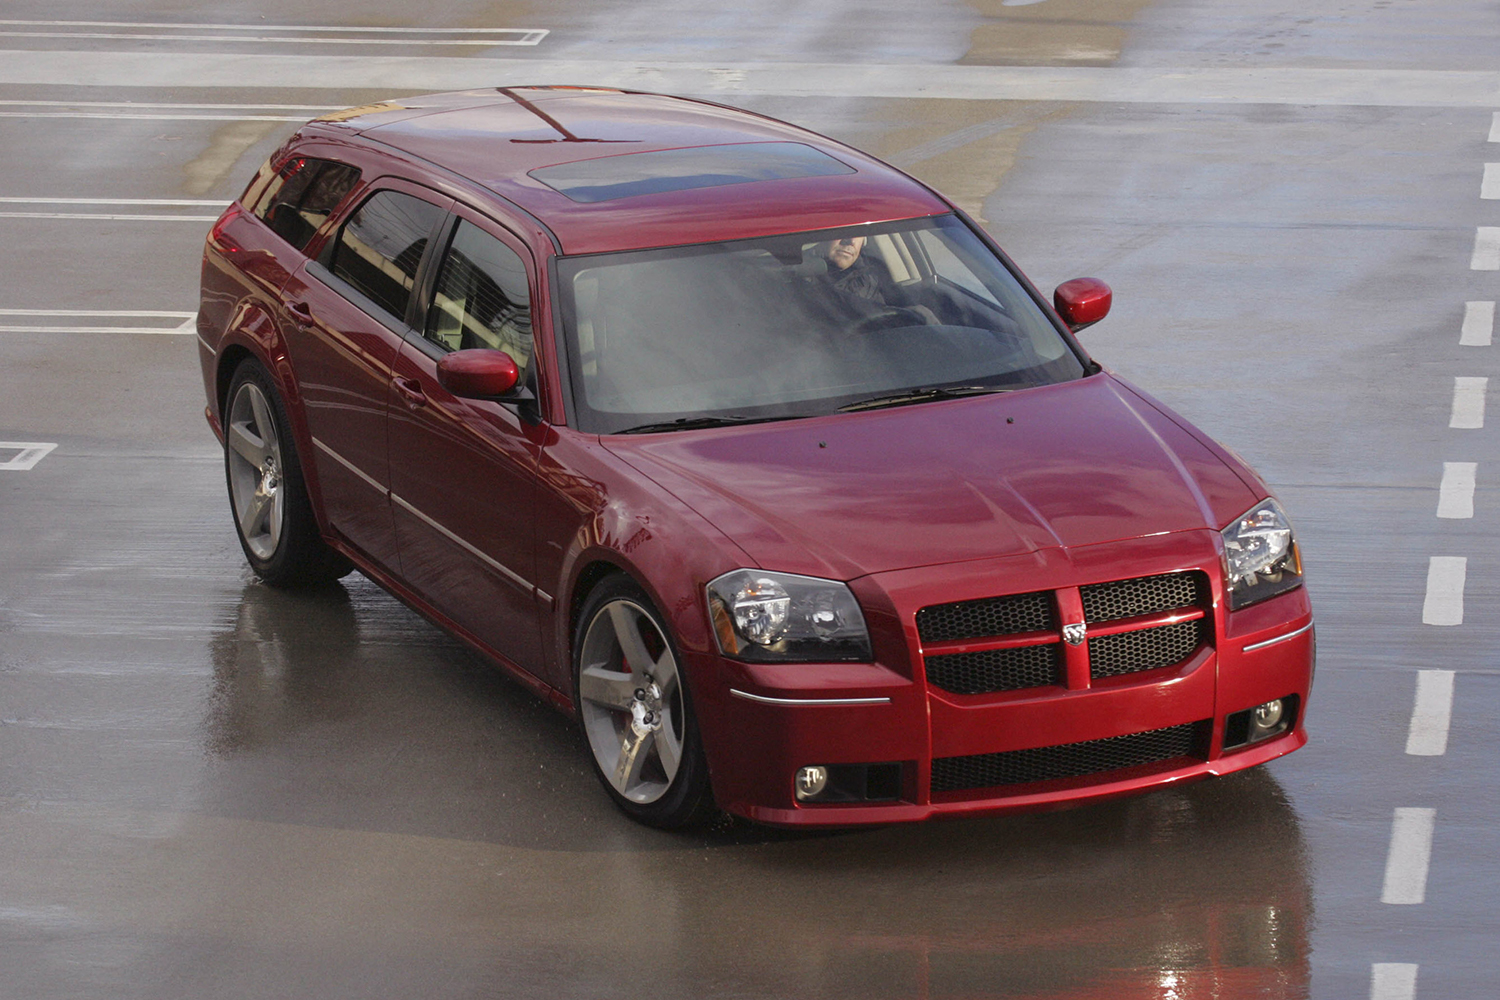 A red 2006 Dodge Magnum SRT8 wagon, which has the potential to be a modern classic car